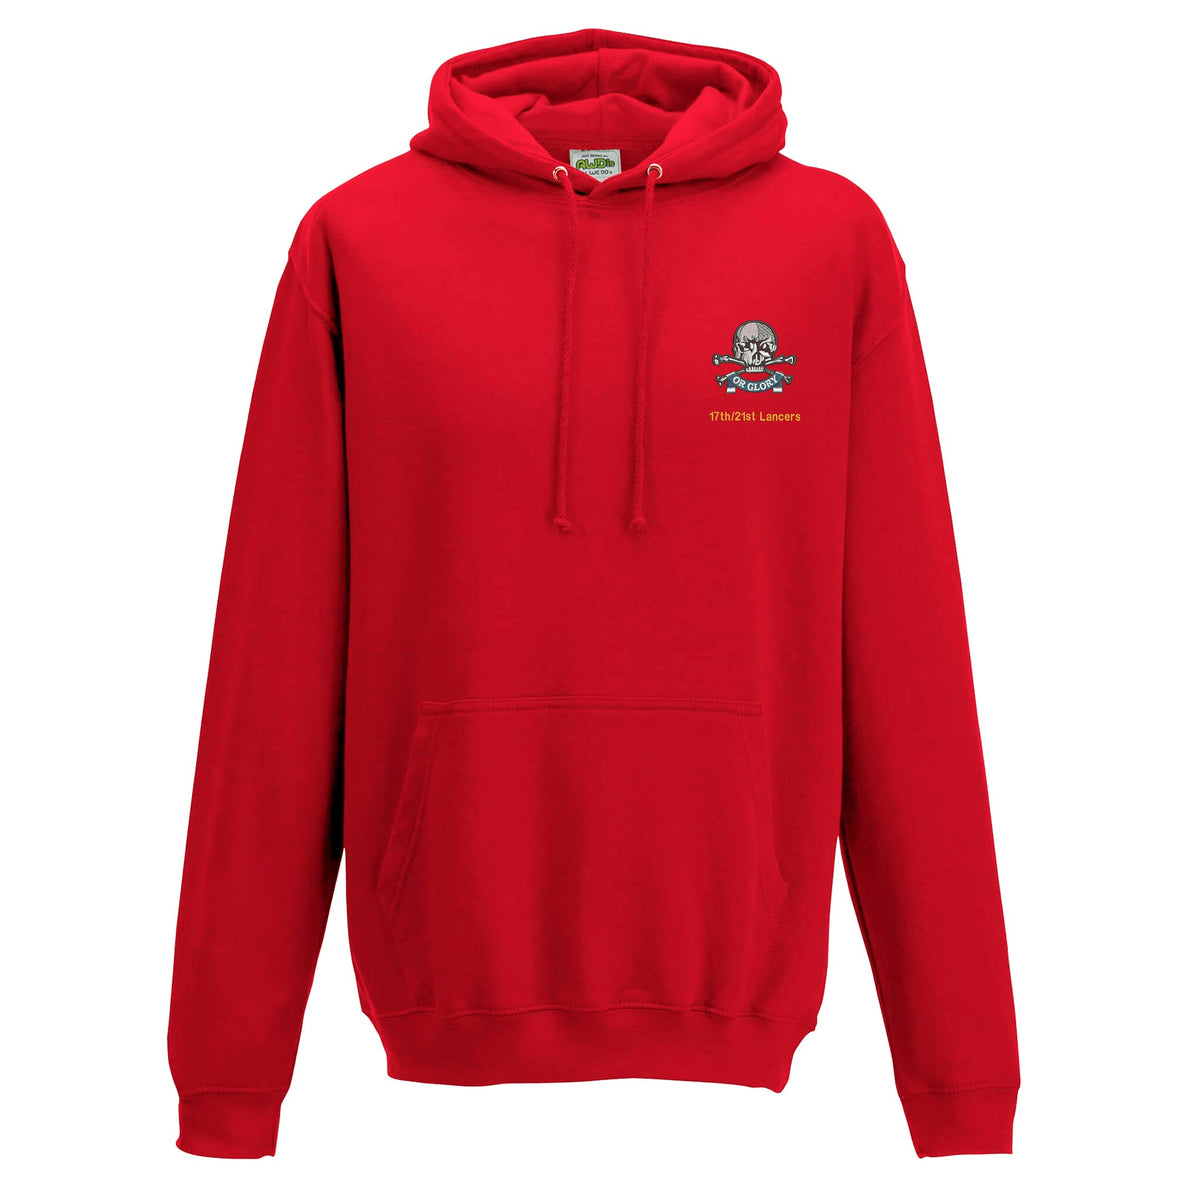 17th/21st Queens Royal Lancers Hoodie — The Military Store